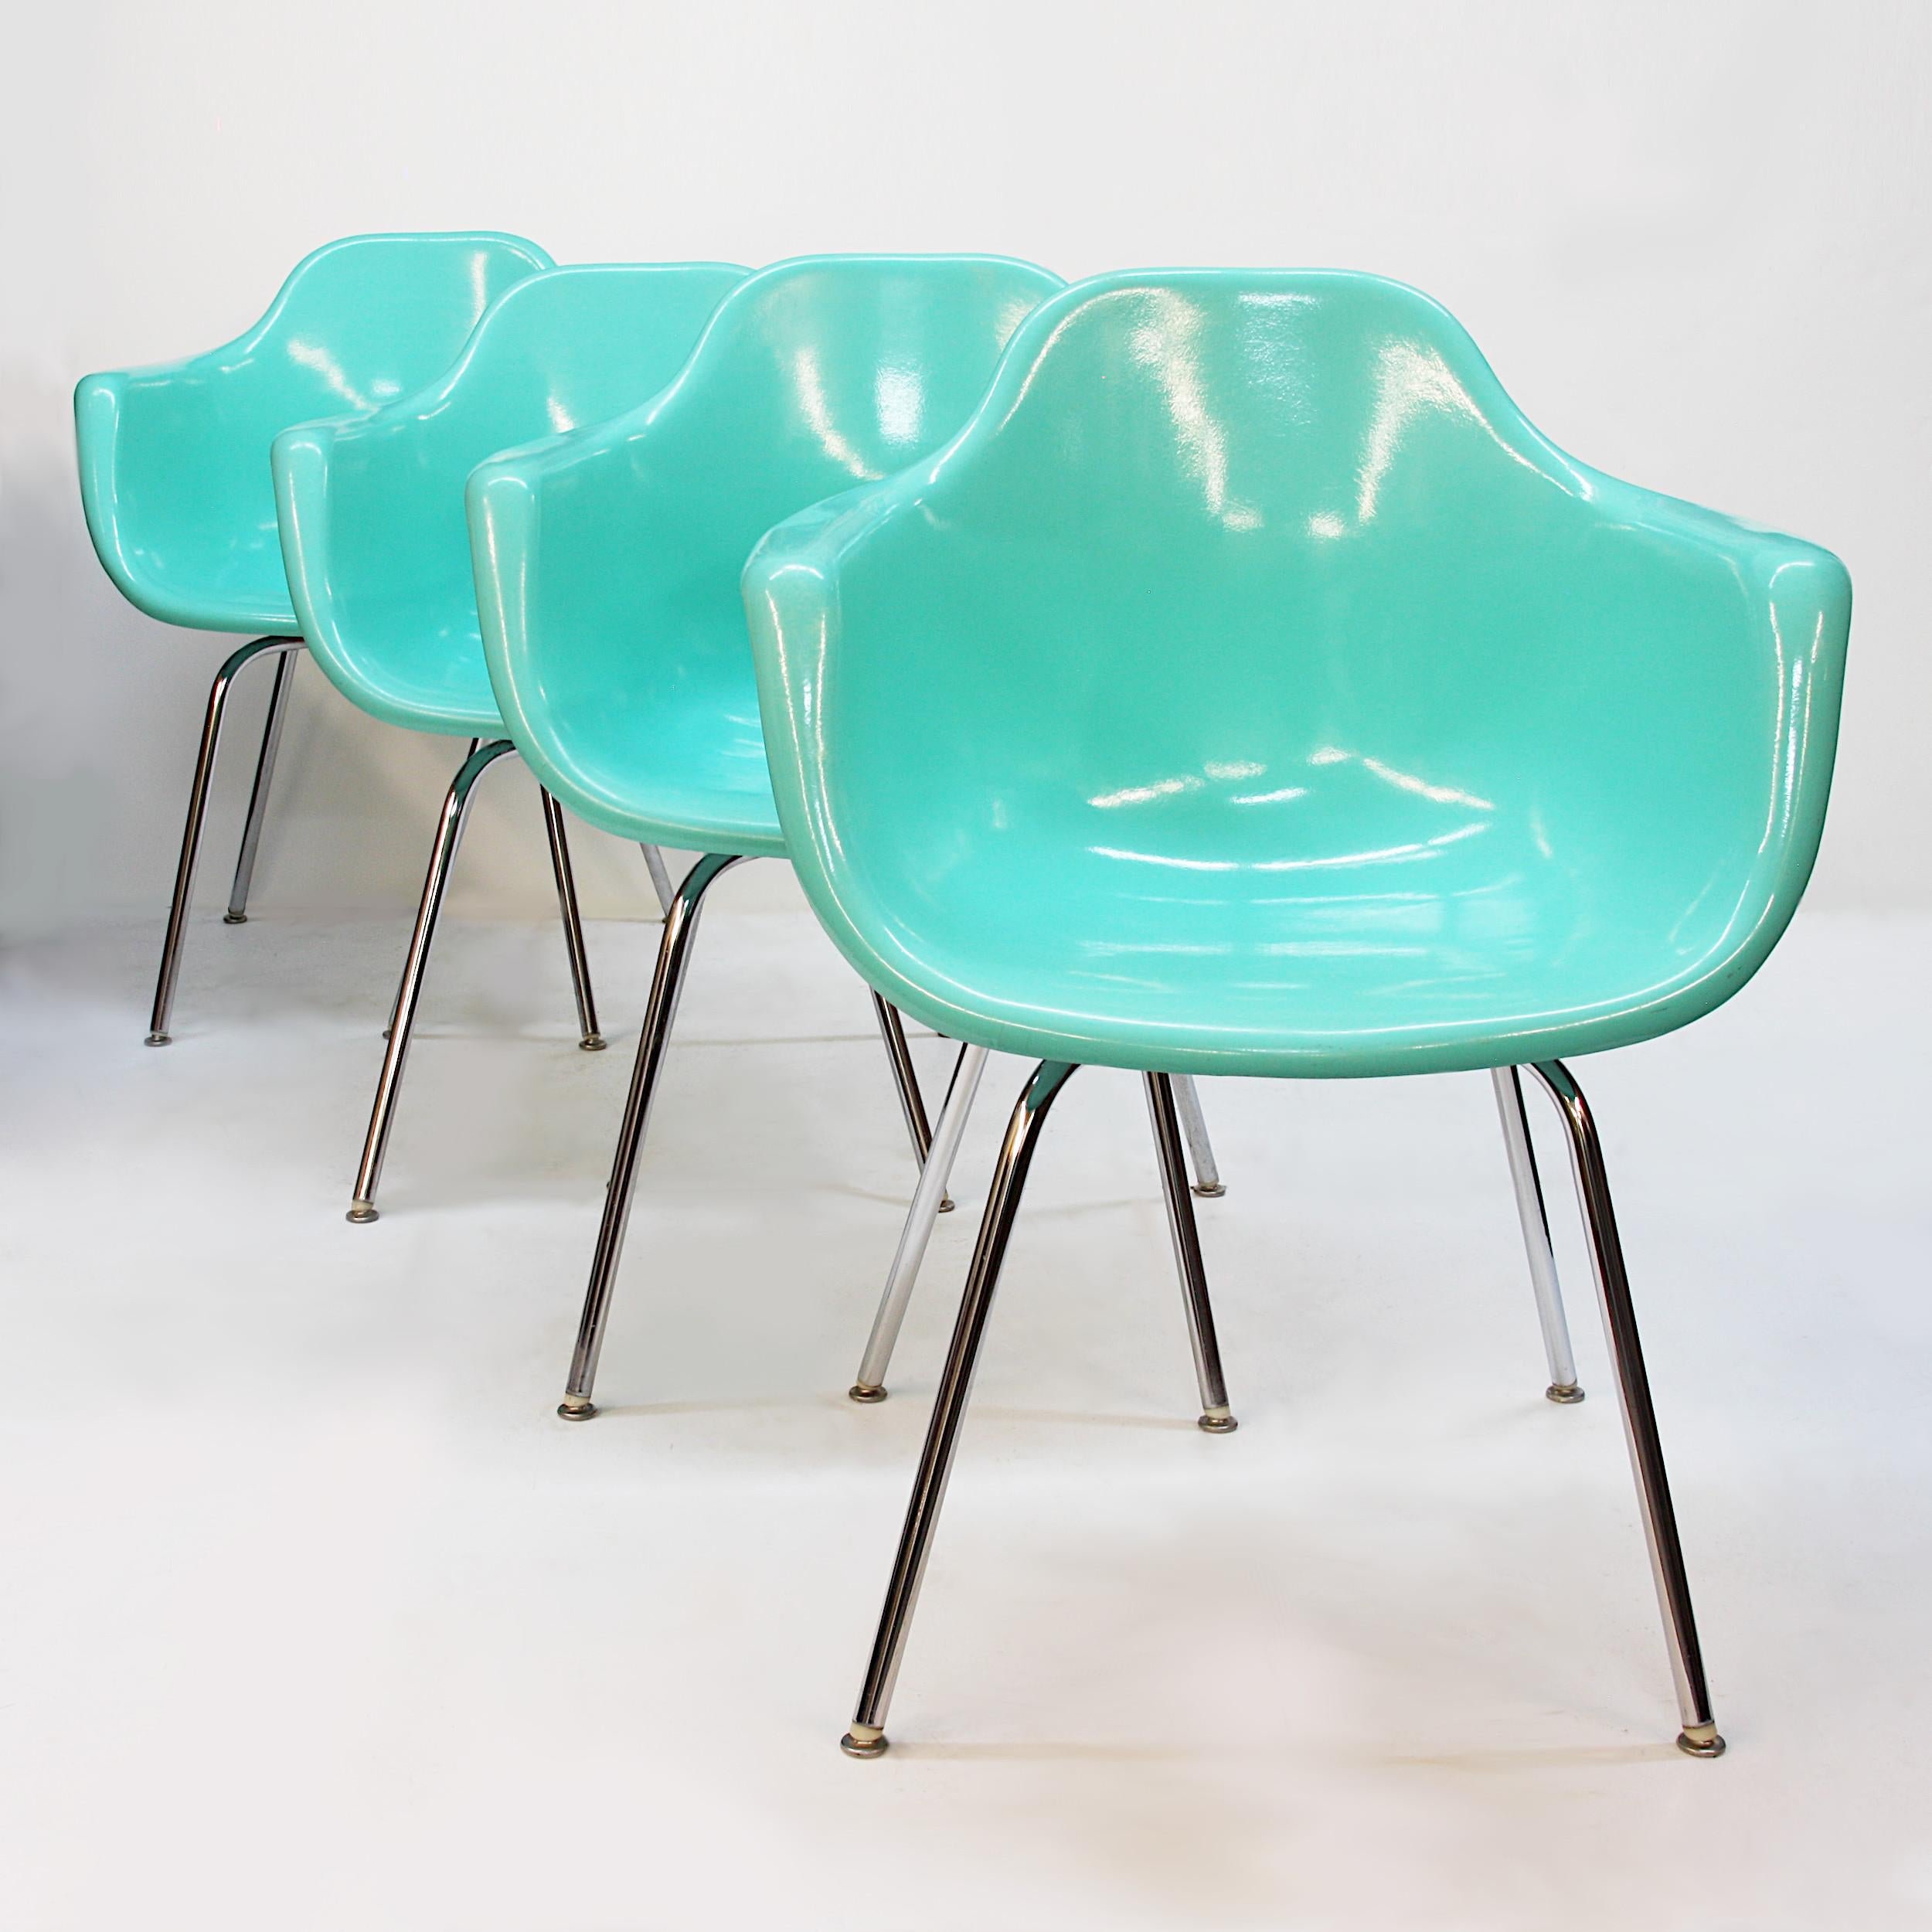 Amazing set of 4 matching fiberglass shell chairs by Krueger Metal Products of Green Bay, Wisconsin. Chairs feature wonderful seafoam green fiberglass shells, chrome bases, and are a great alternative to the Eames/Herman Miller shells! Remarkably